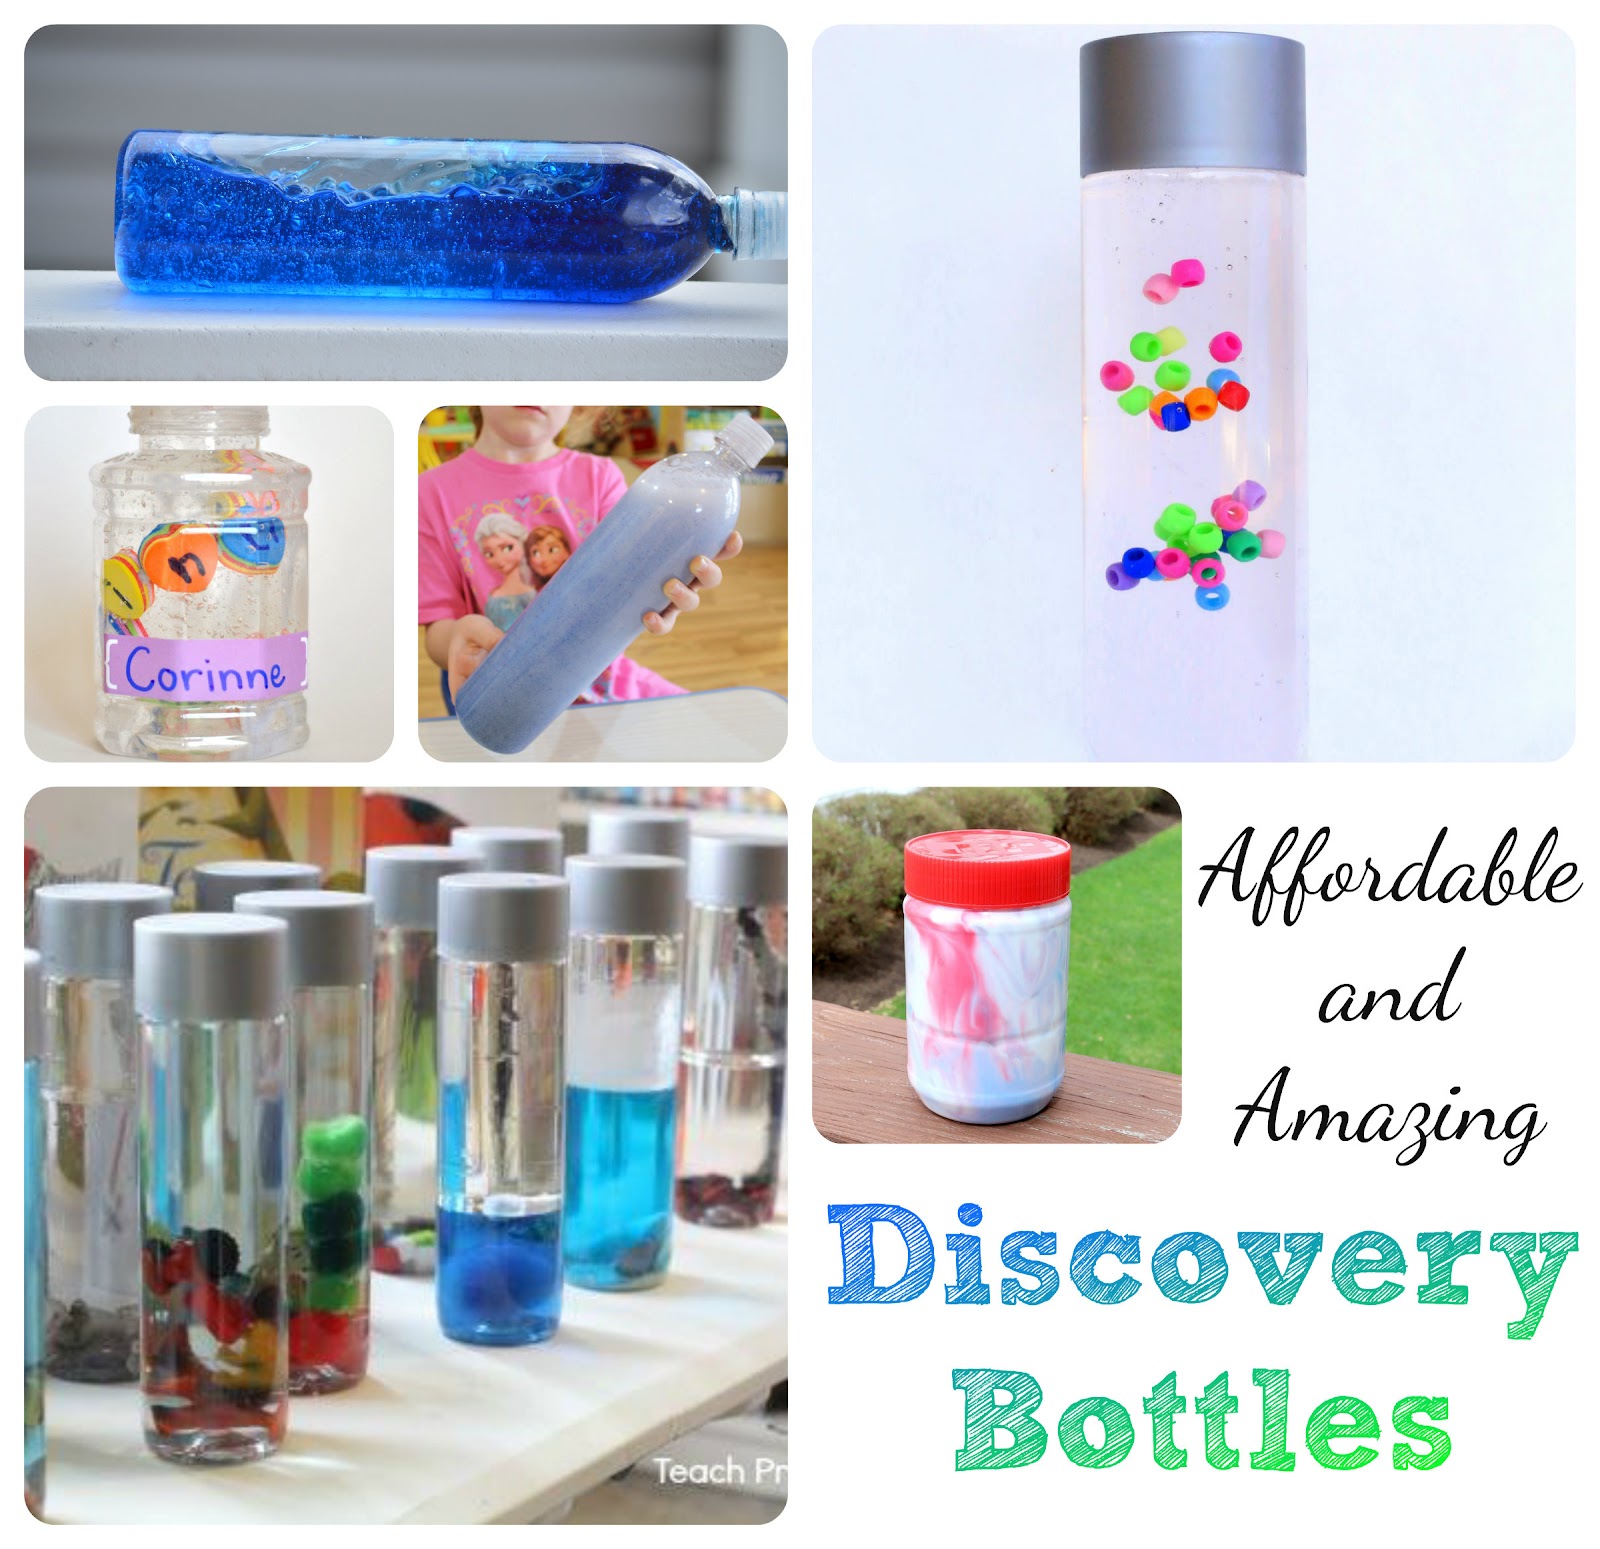 Affordable and Amazing Discovery Bottles.jpg